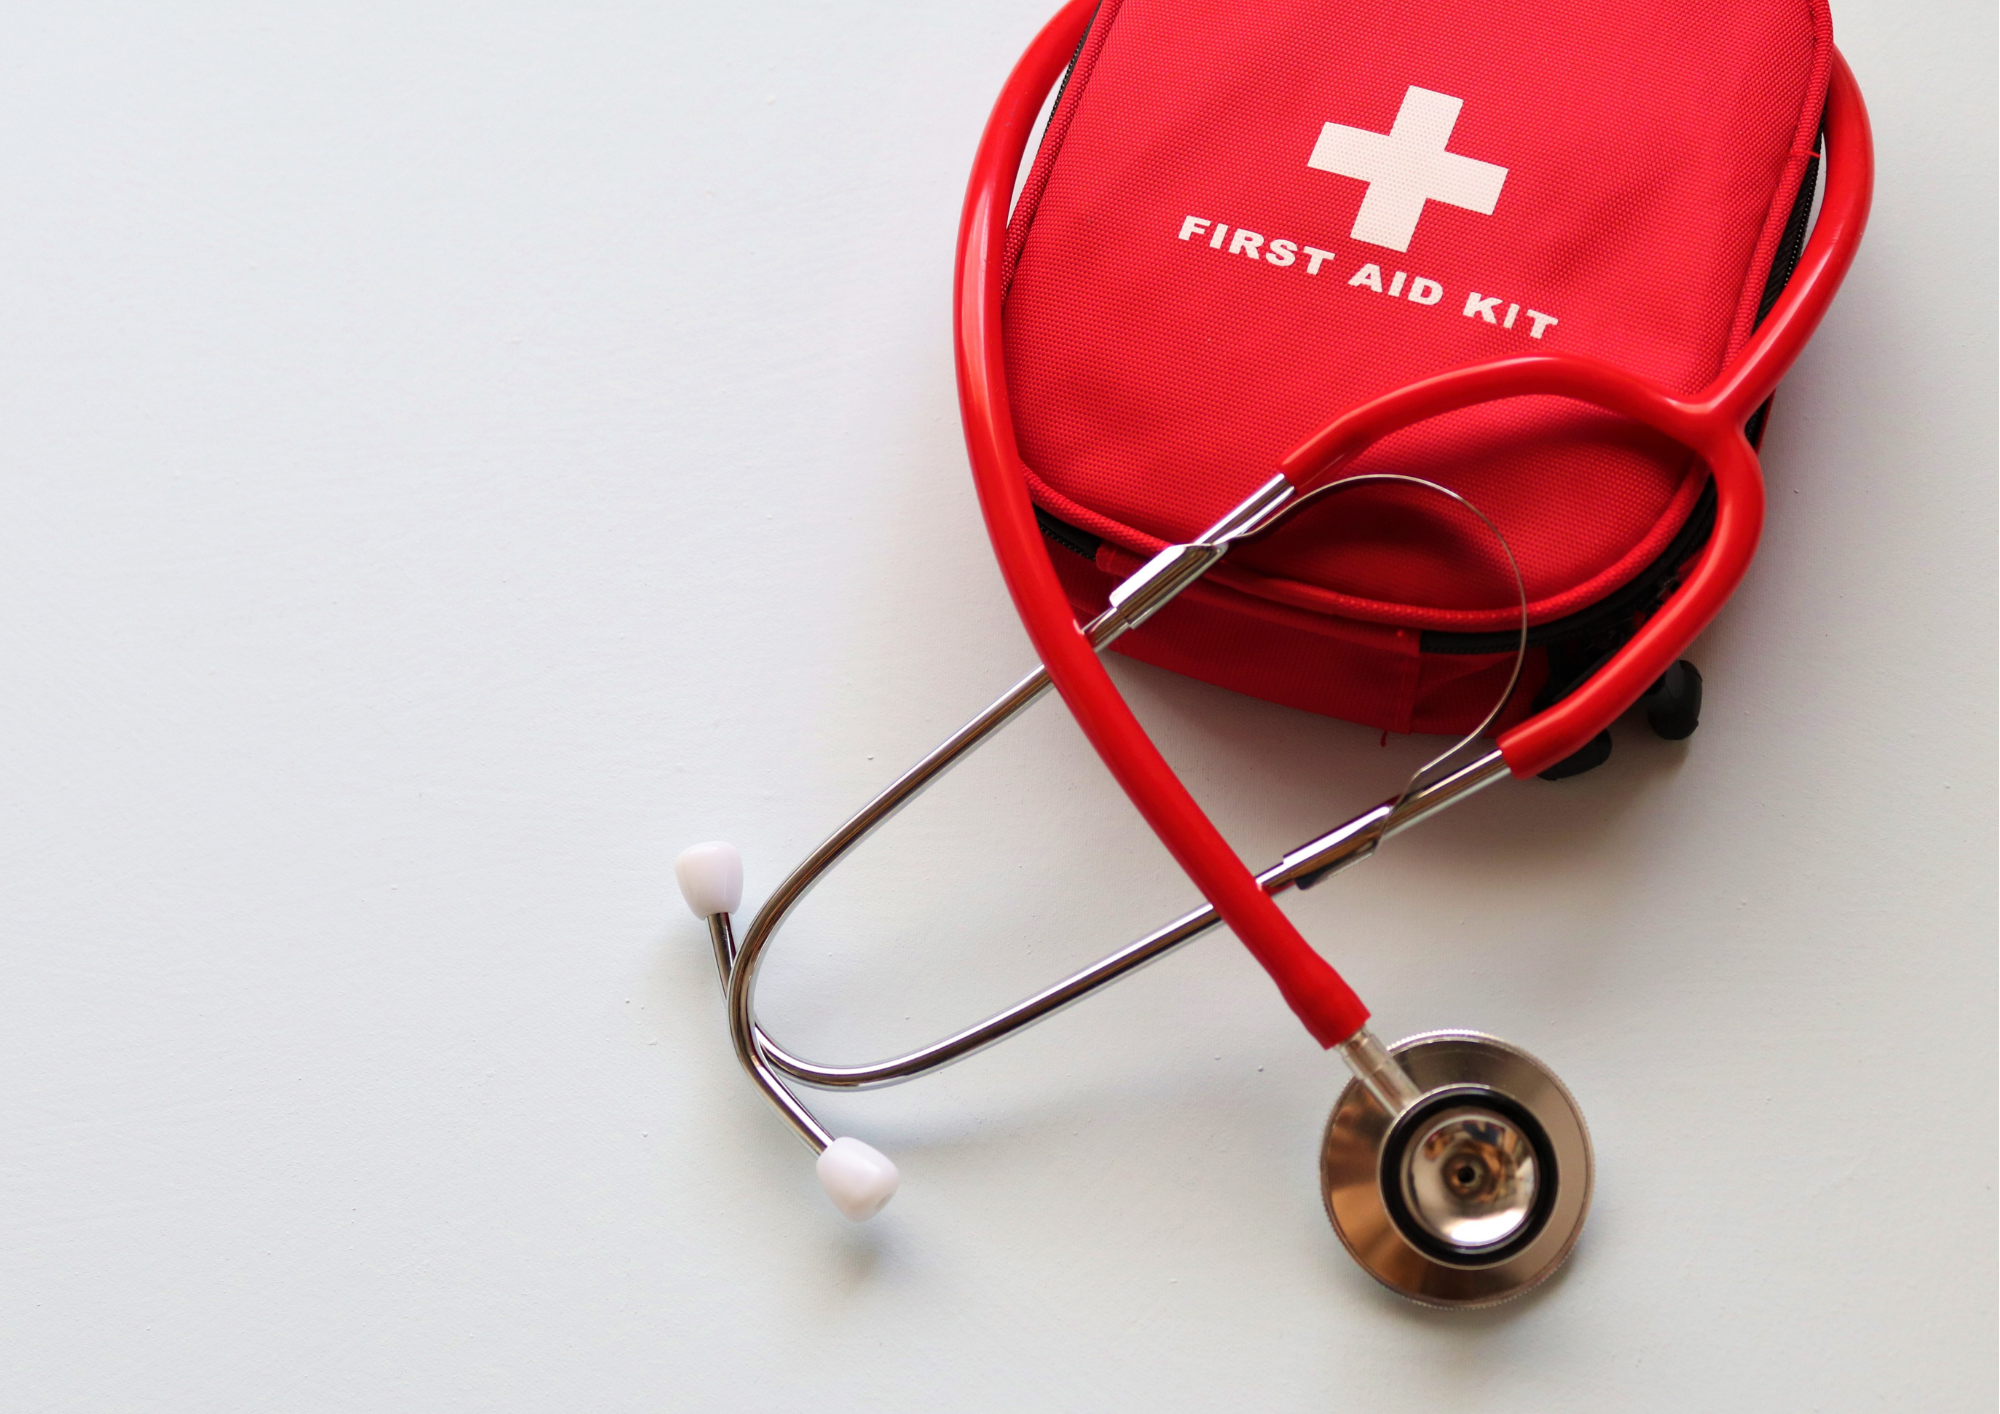 Why is First Aid Important?